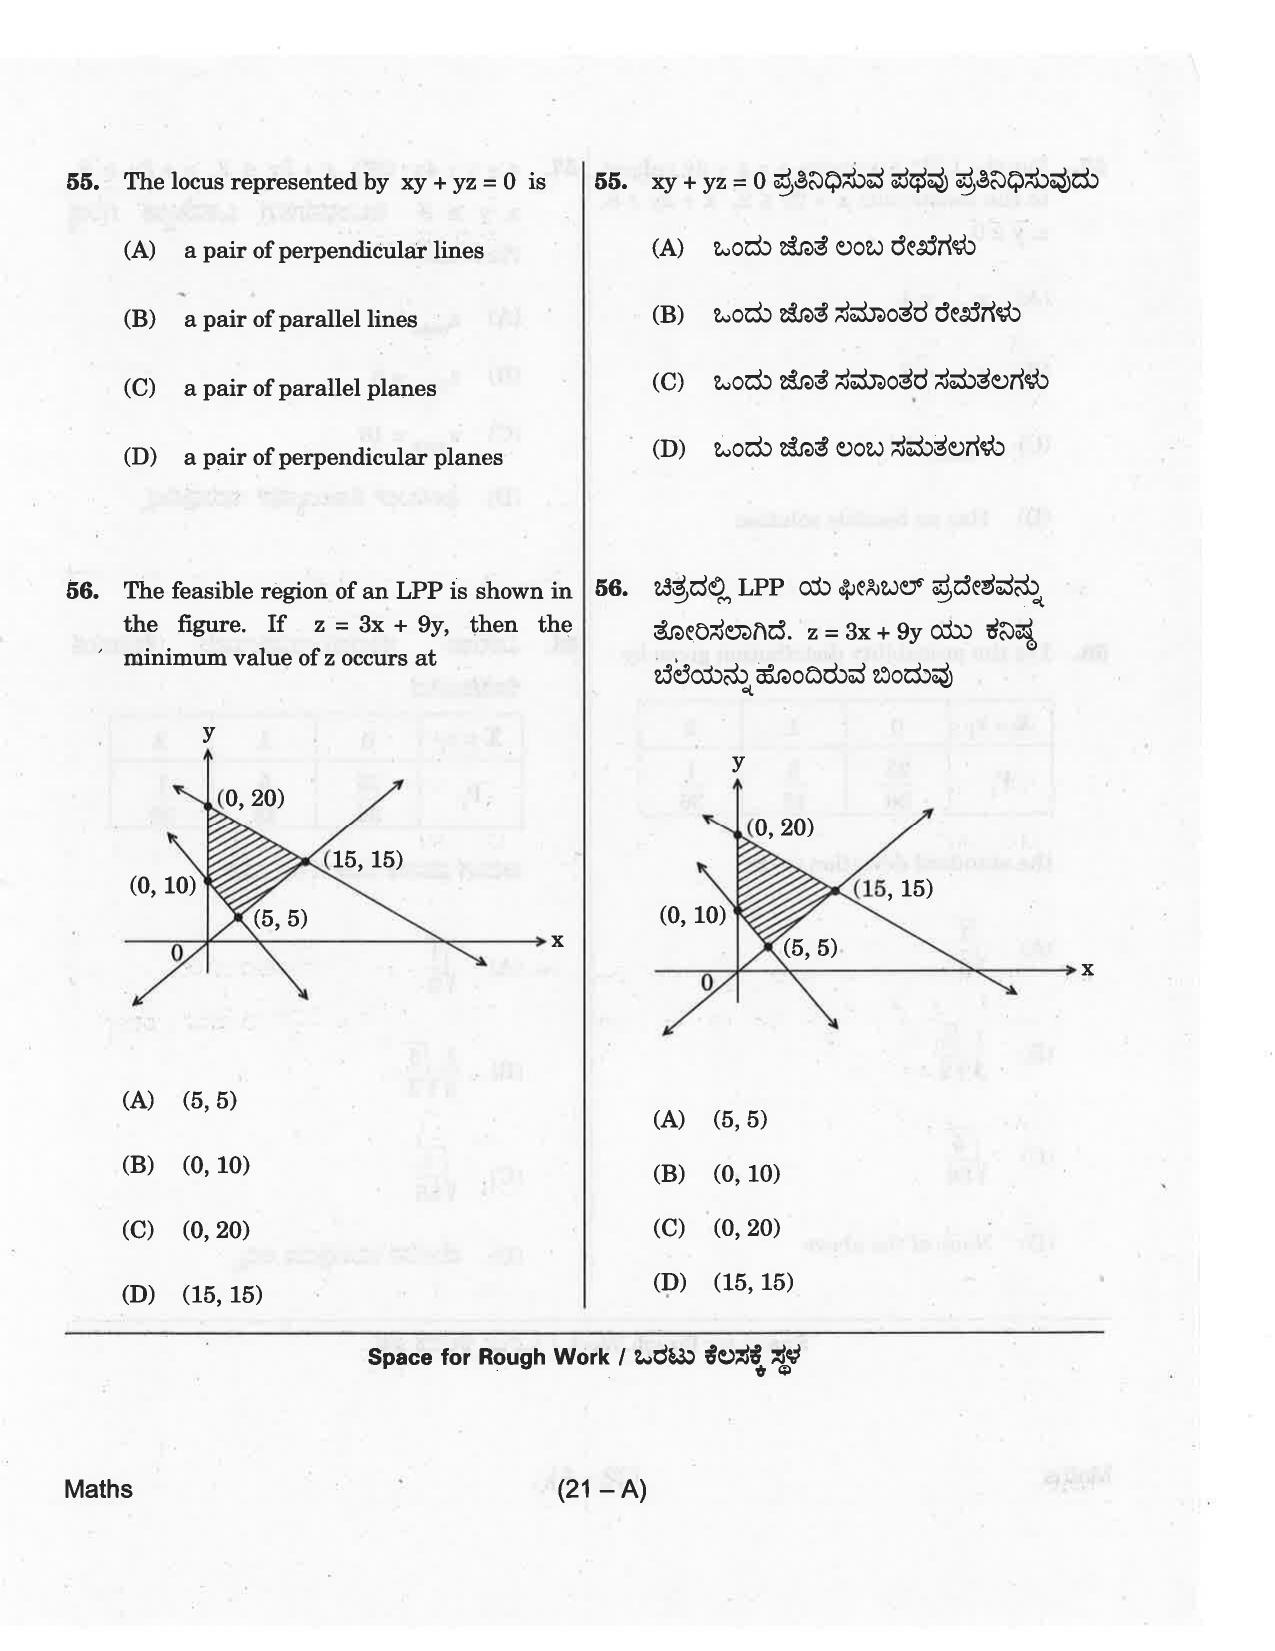 KCET Mathematics 2018 Question Papers - Page 21